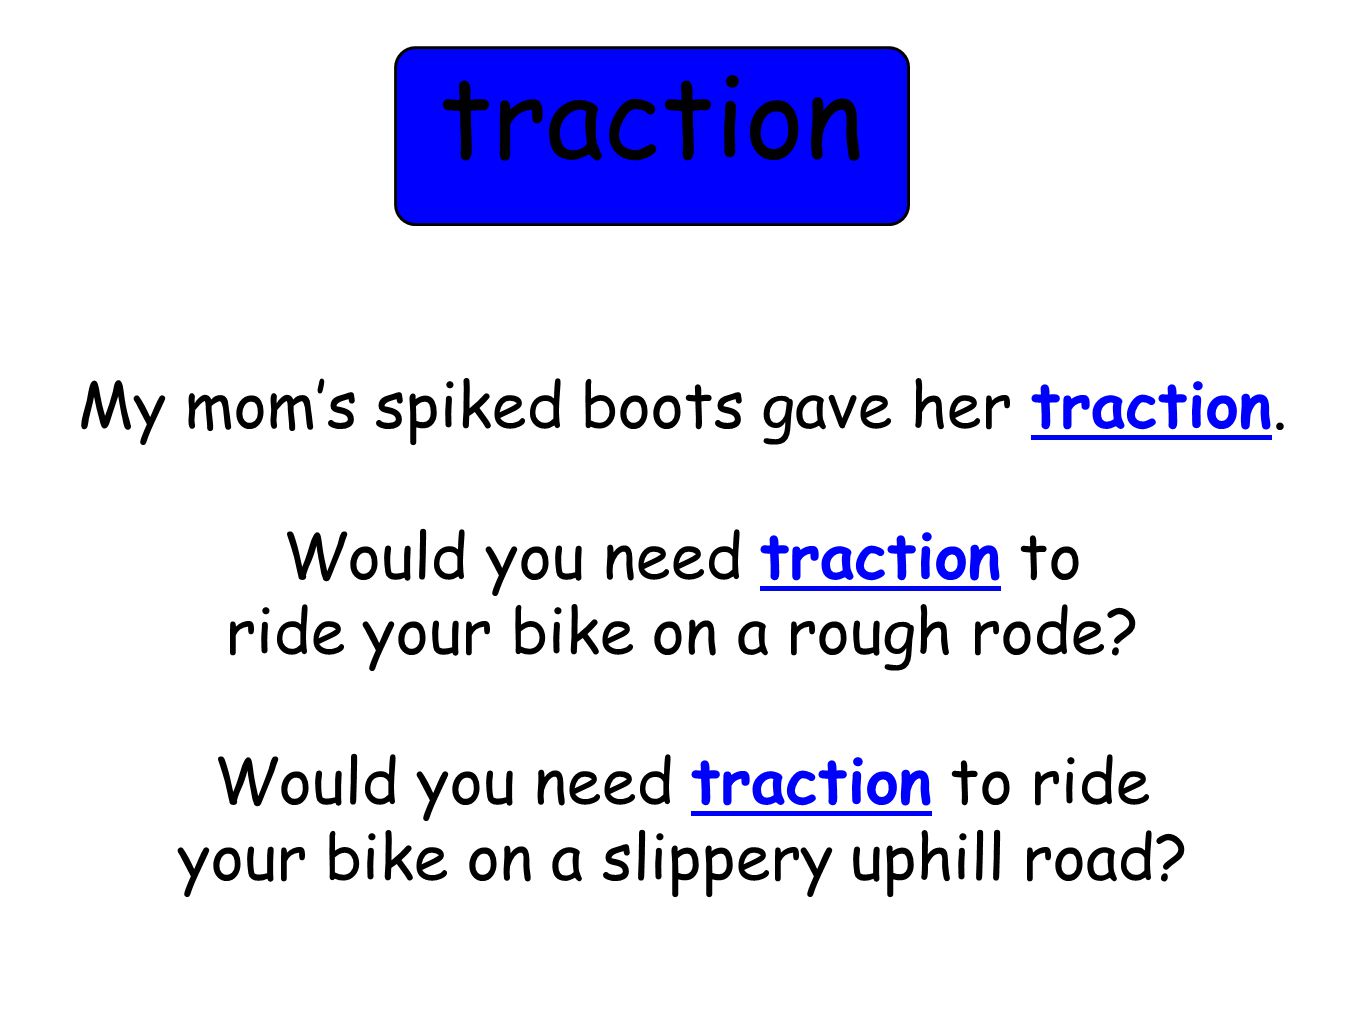 My mom’s spiked boots gave her traction. Would you need traction to ride your bike on a rough rode.